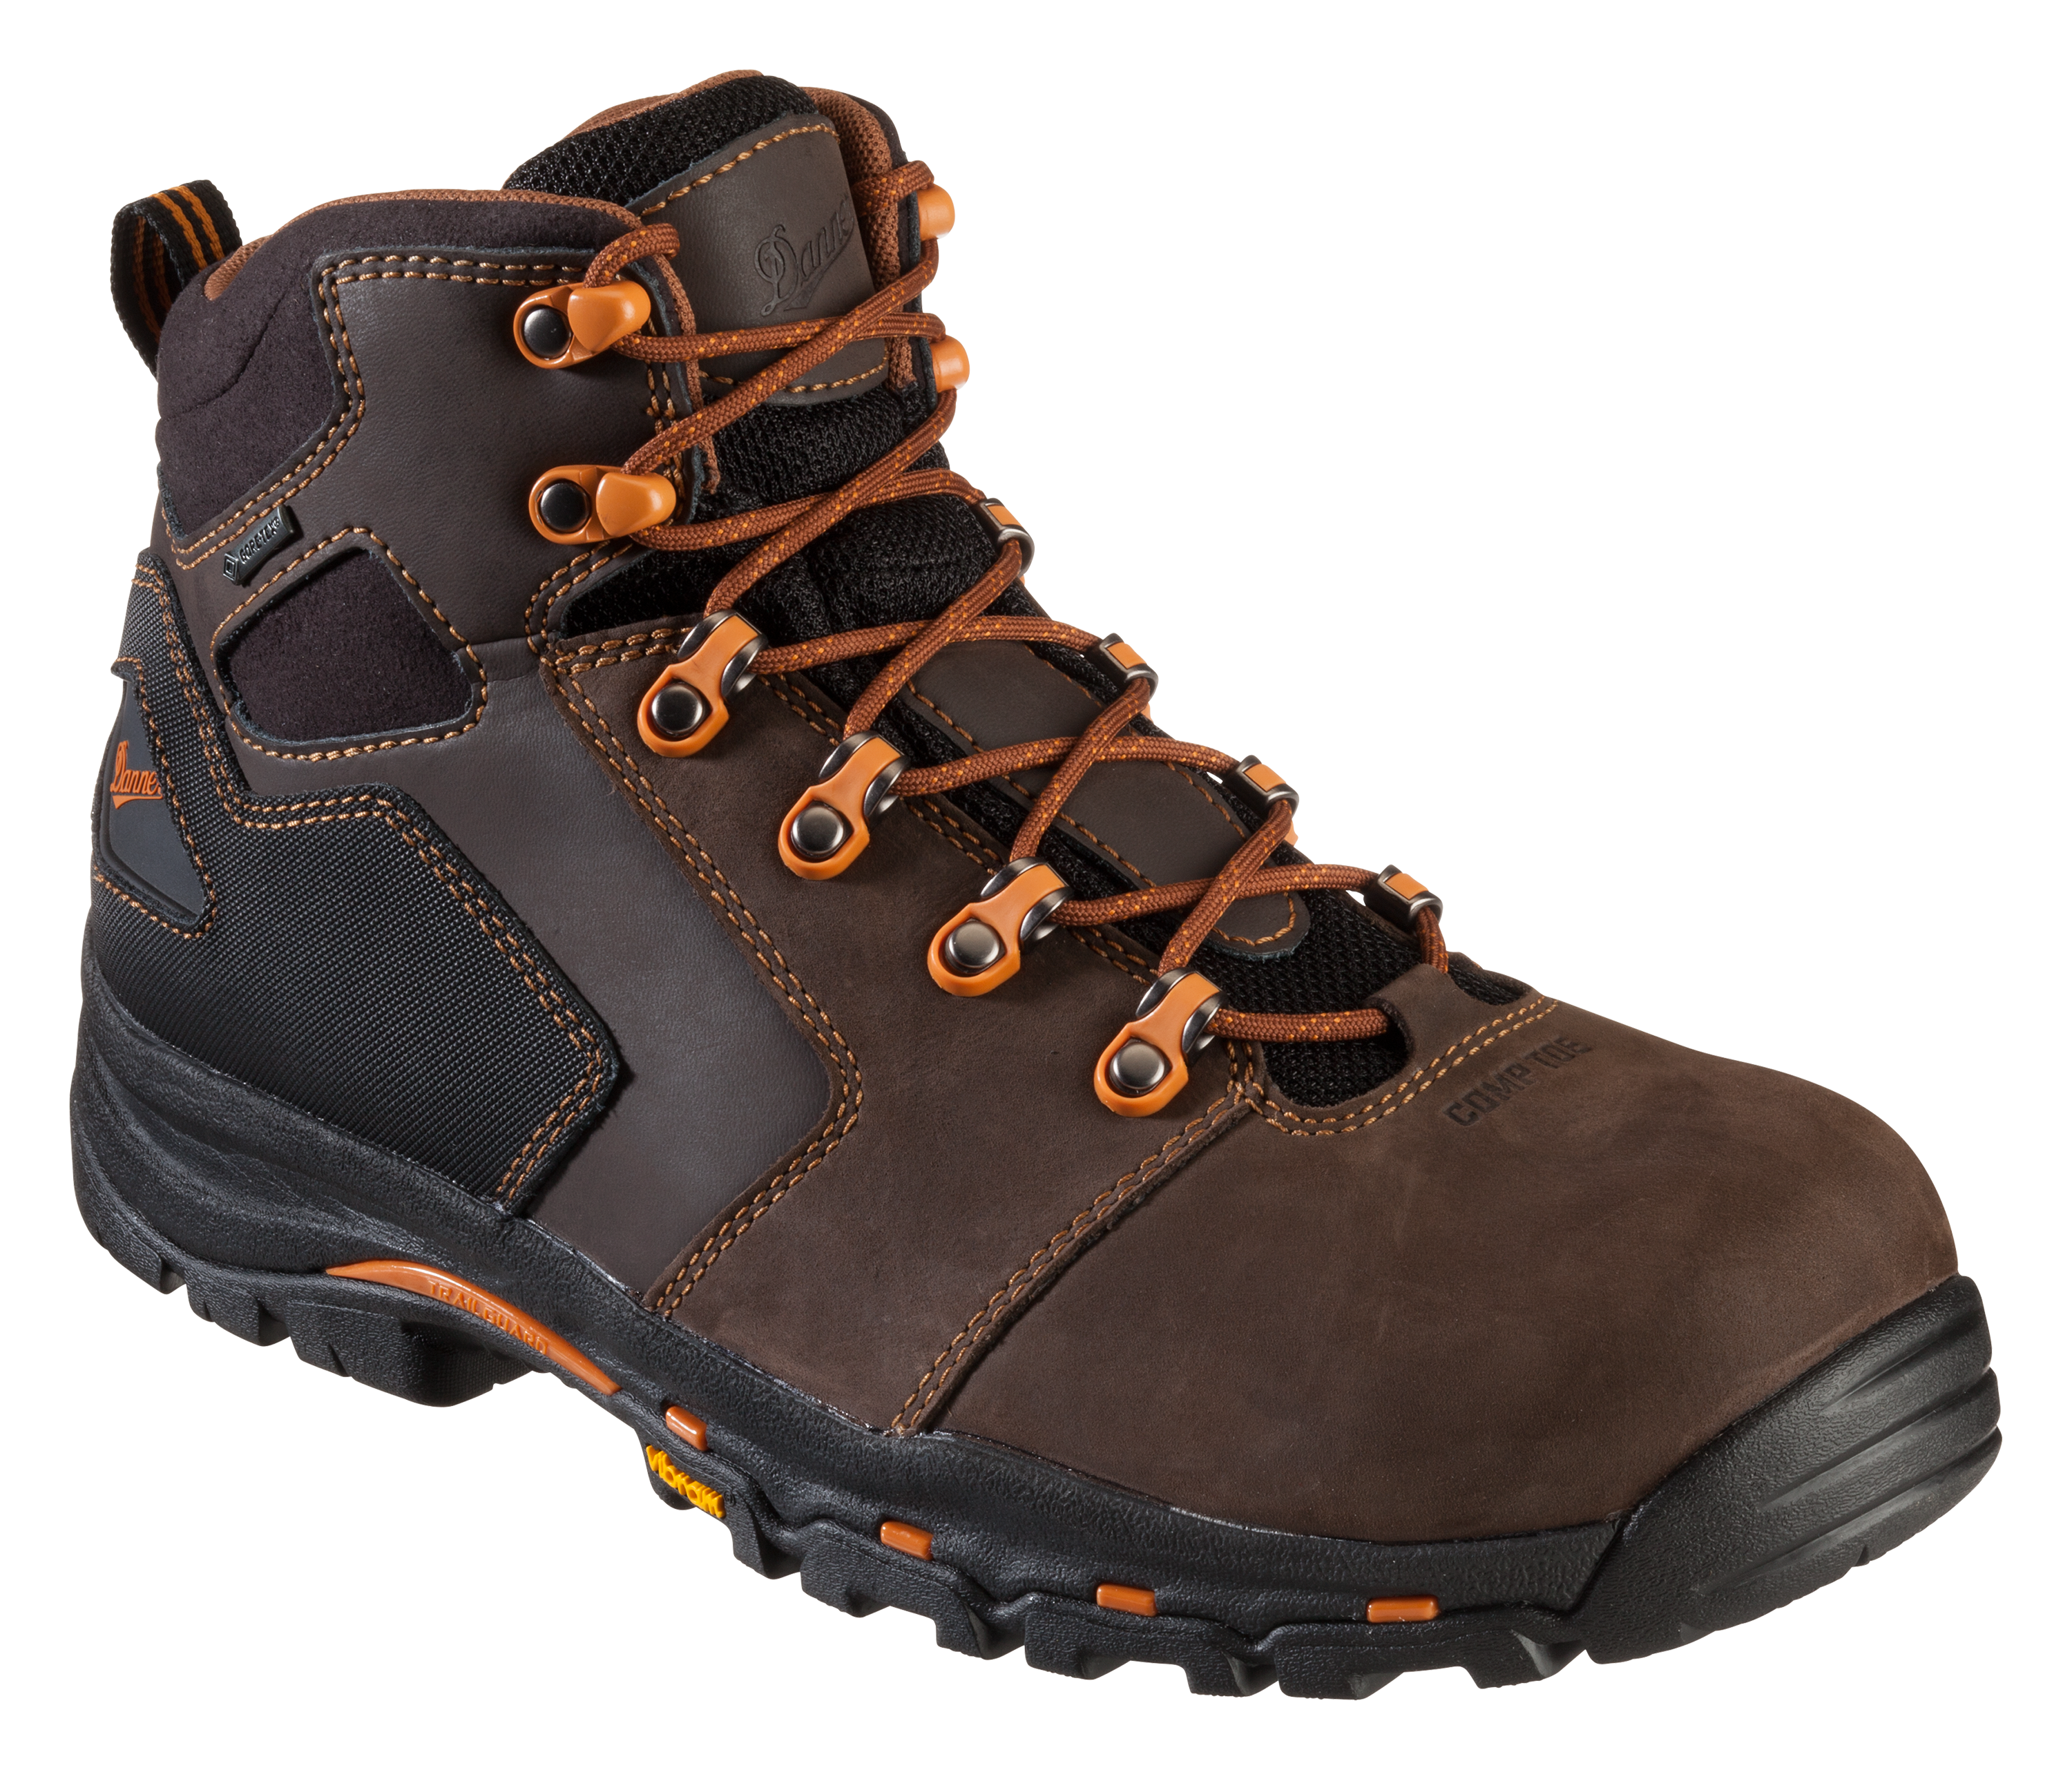 Danner Vicious GORE-TEX NonMetallic Safety Toe Work Boots for Men